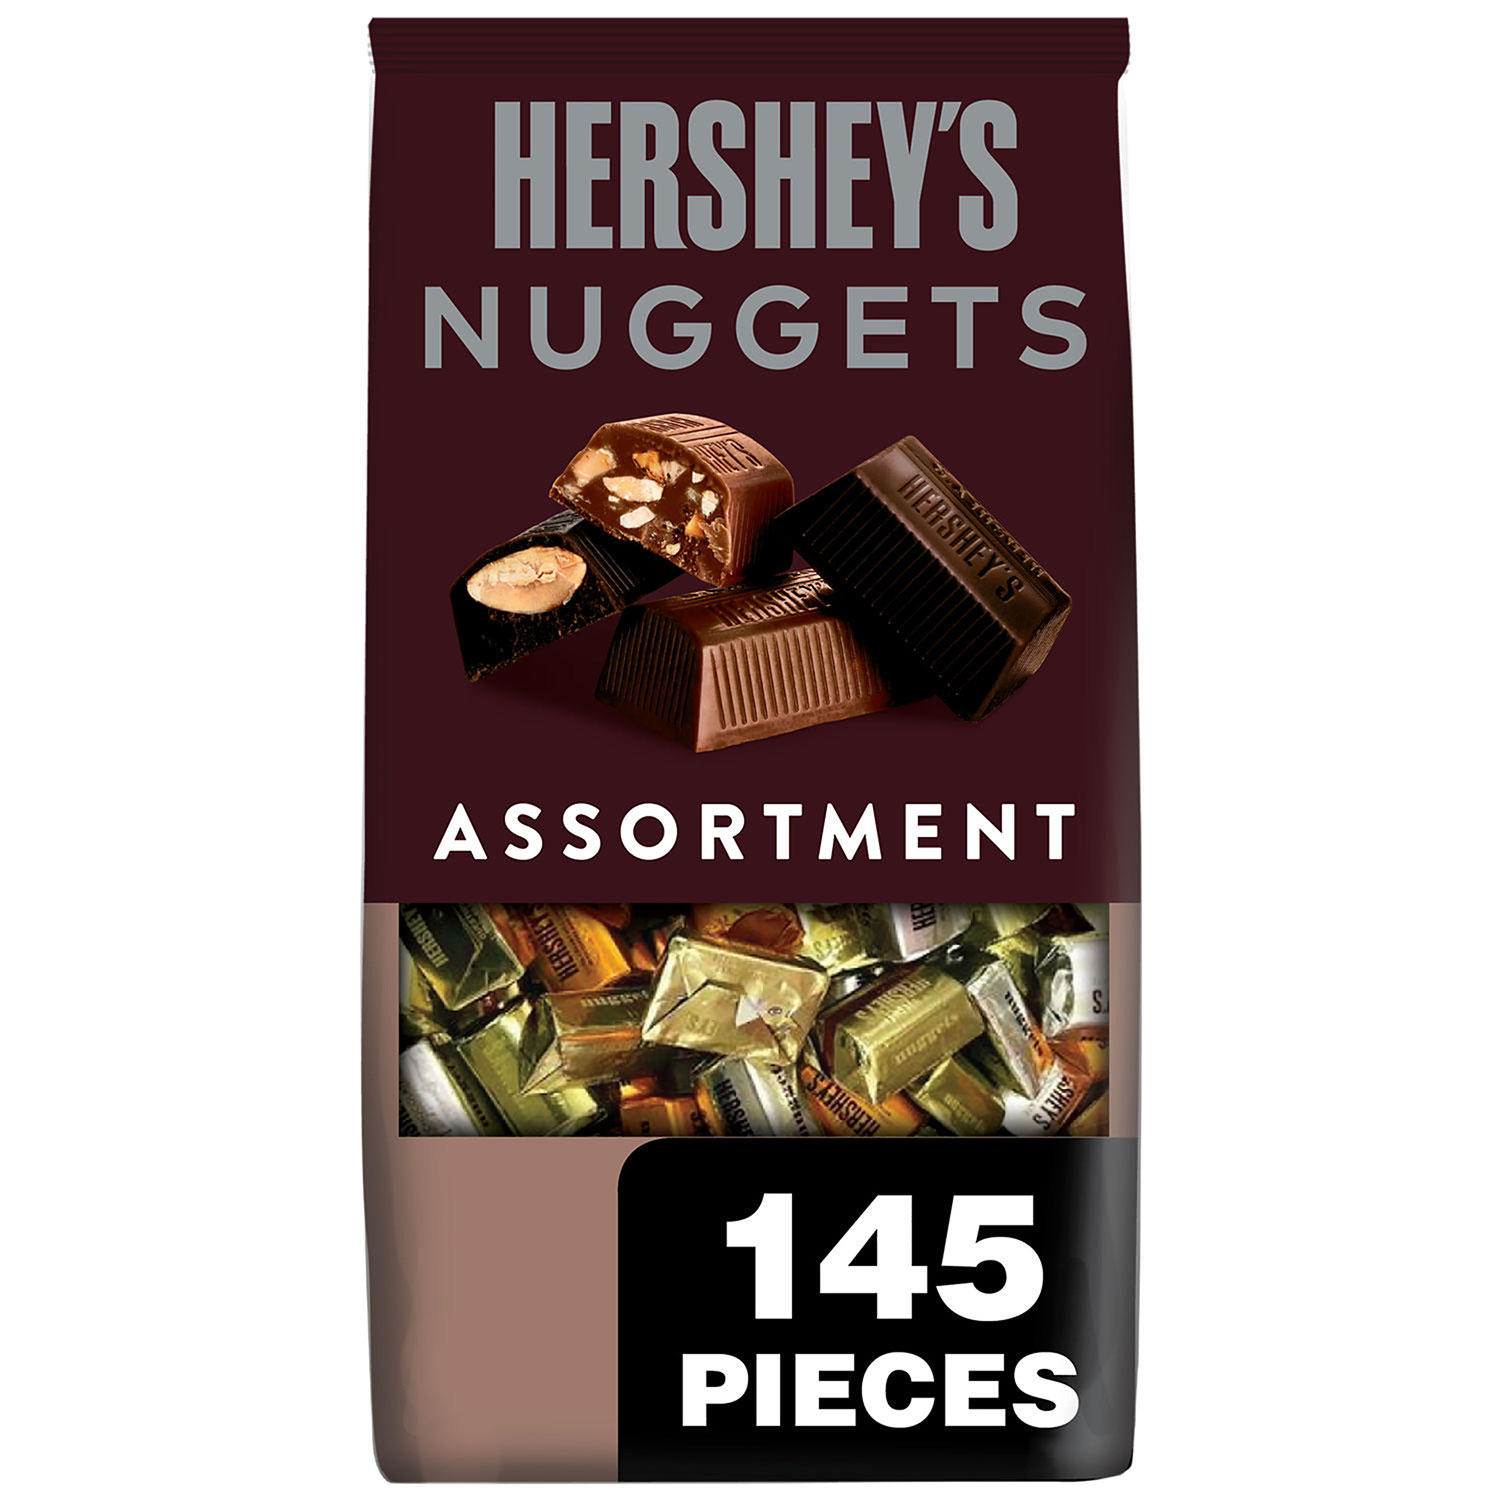 HERSHEY'S NUGGETS Assorted Chocolate Candy, 145 pcs.